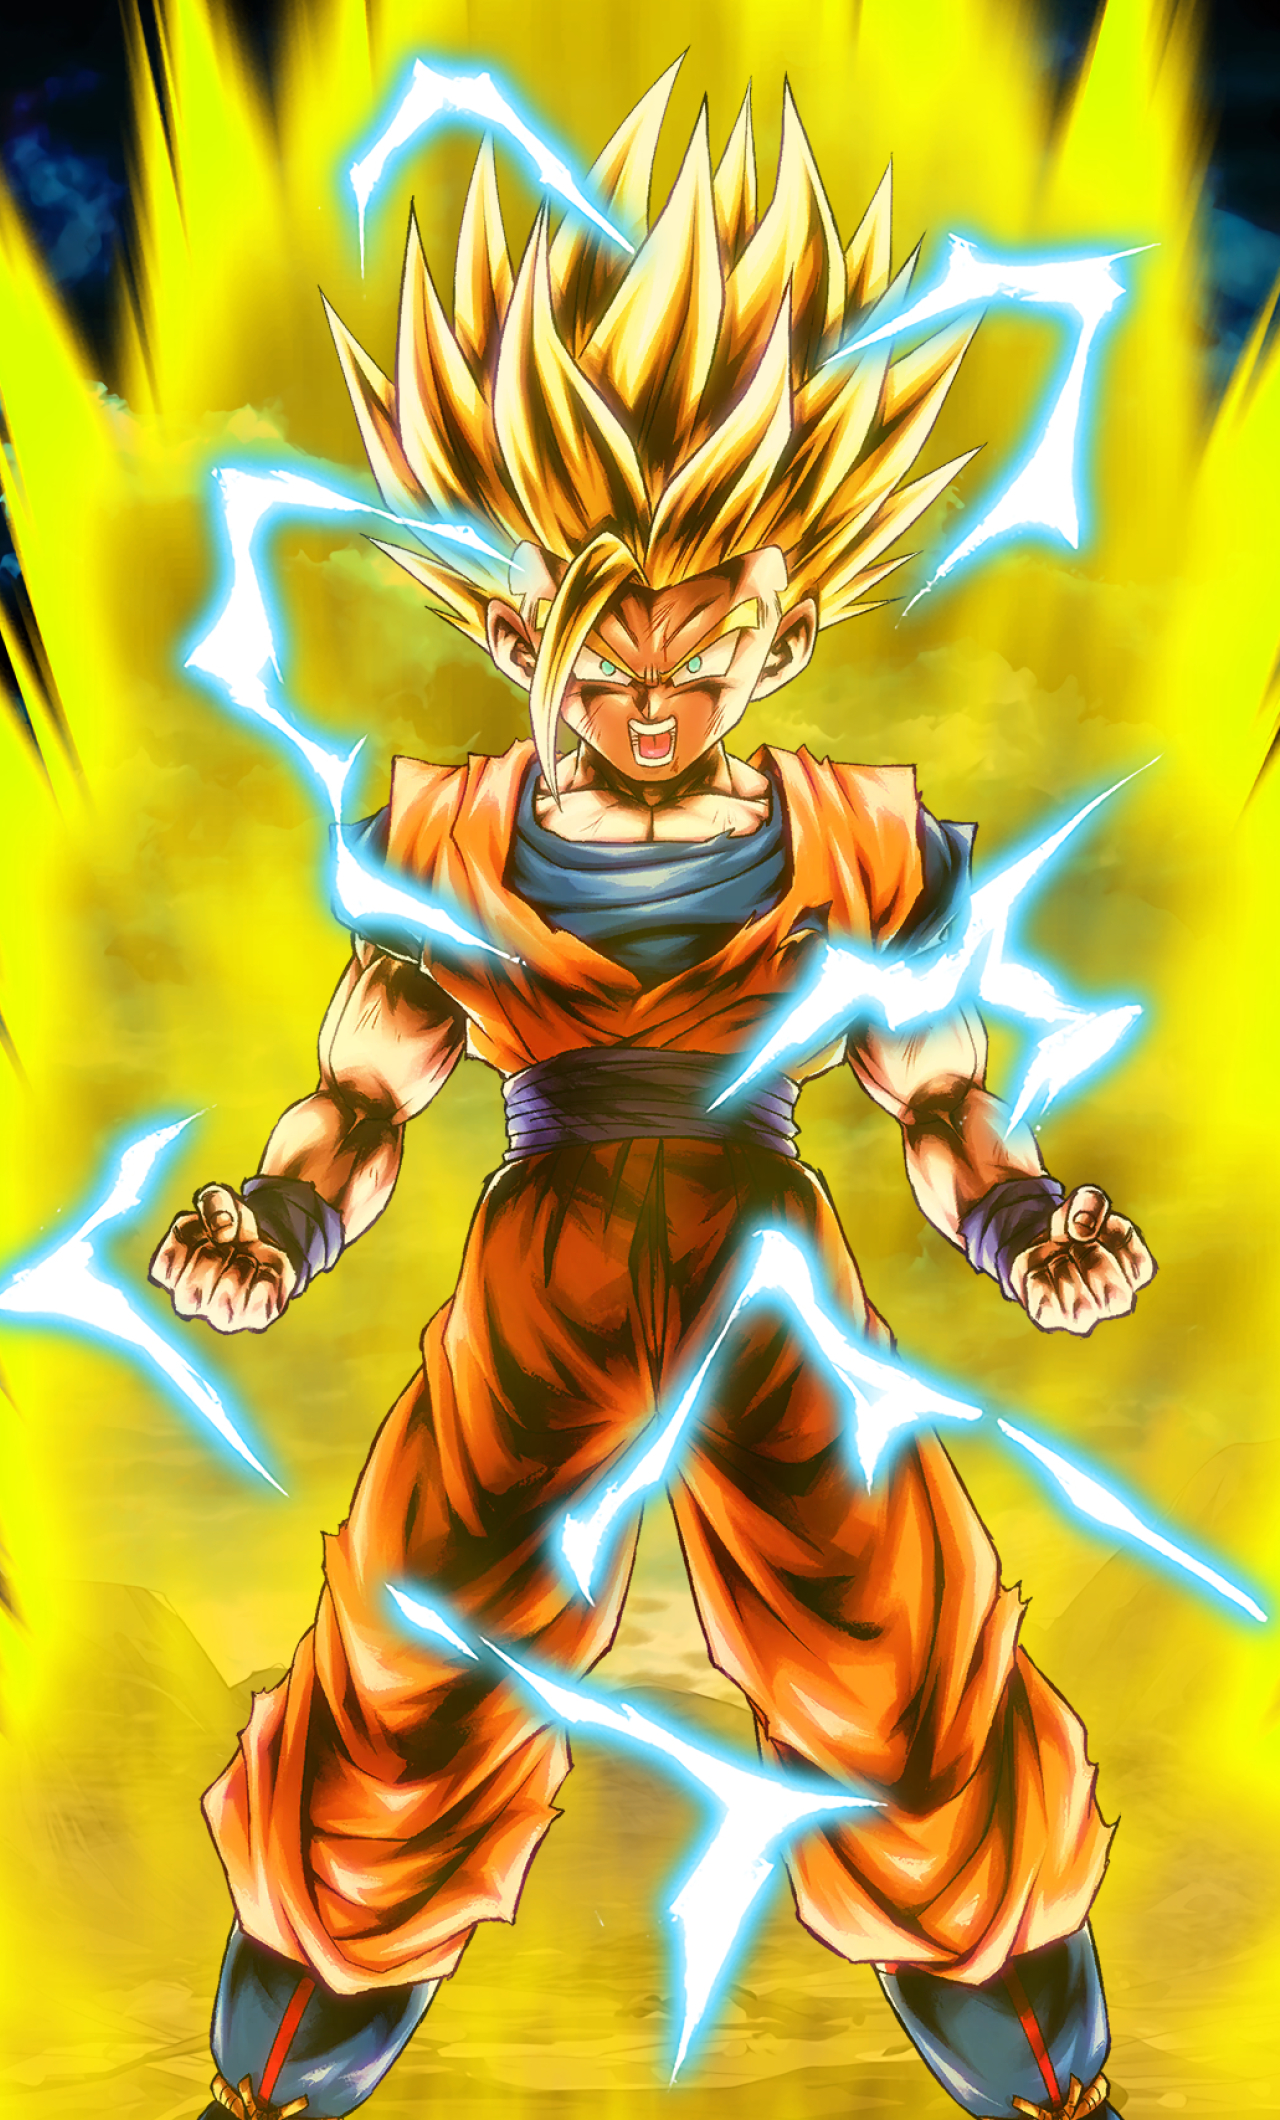 Super Saiyan 2 Gohan Cool HDDragon Ball Z Wallpaper, HD Anime 4K  Wallpapers, Images and Background - Wallpapers Den